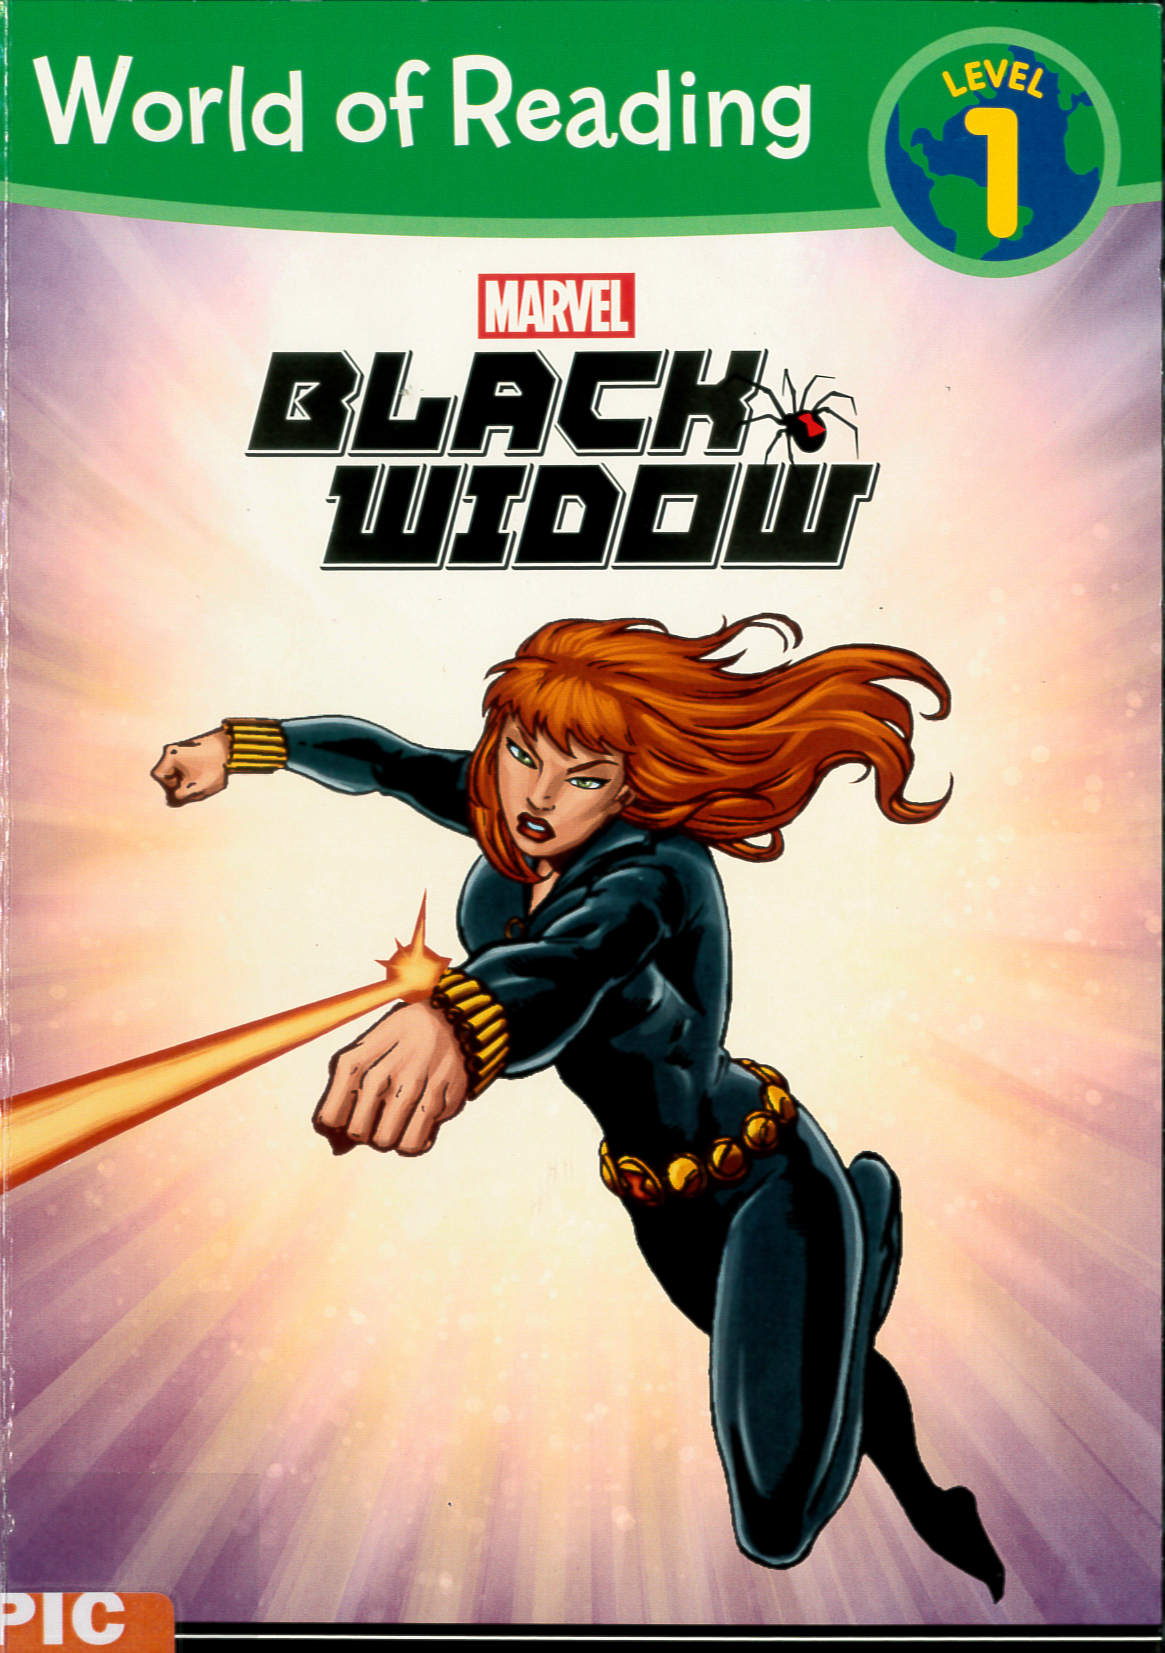 This is Black Widow /